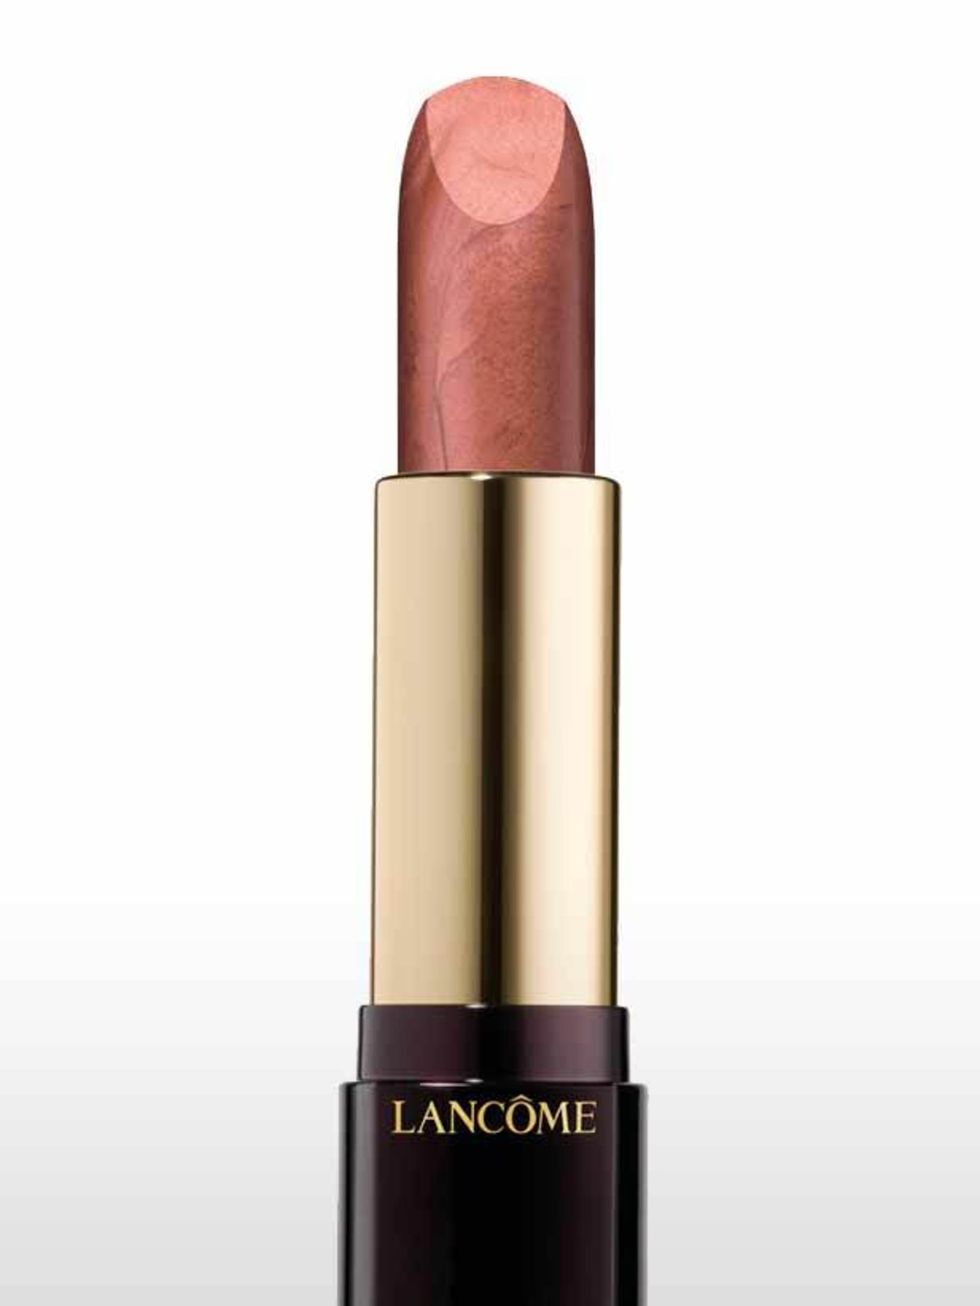 <p>Apply this rose-tinted beige straight from the bullet  its easy to wear and flatters all skin tones.</p><p>L'Absolue Rouge Lipstick in 272, £17.50, by <a href="http://www.lancome.co.uk/_en/_gb/catalog/product_color.aspx?prdcode=253019&amp;CategoryCod